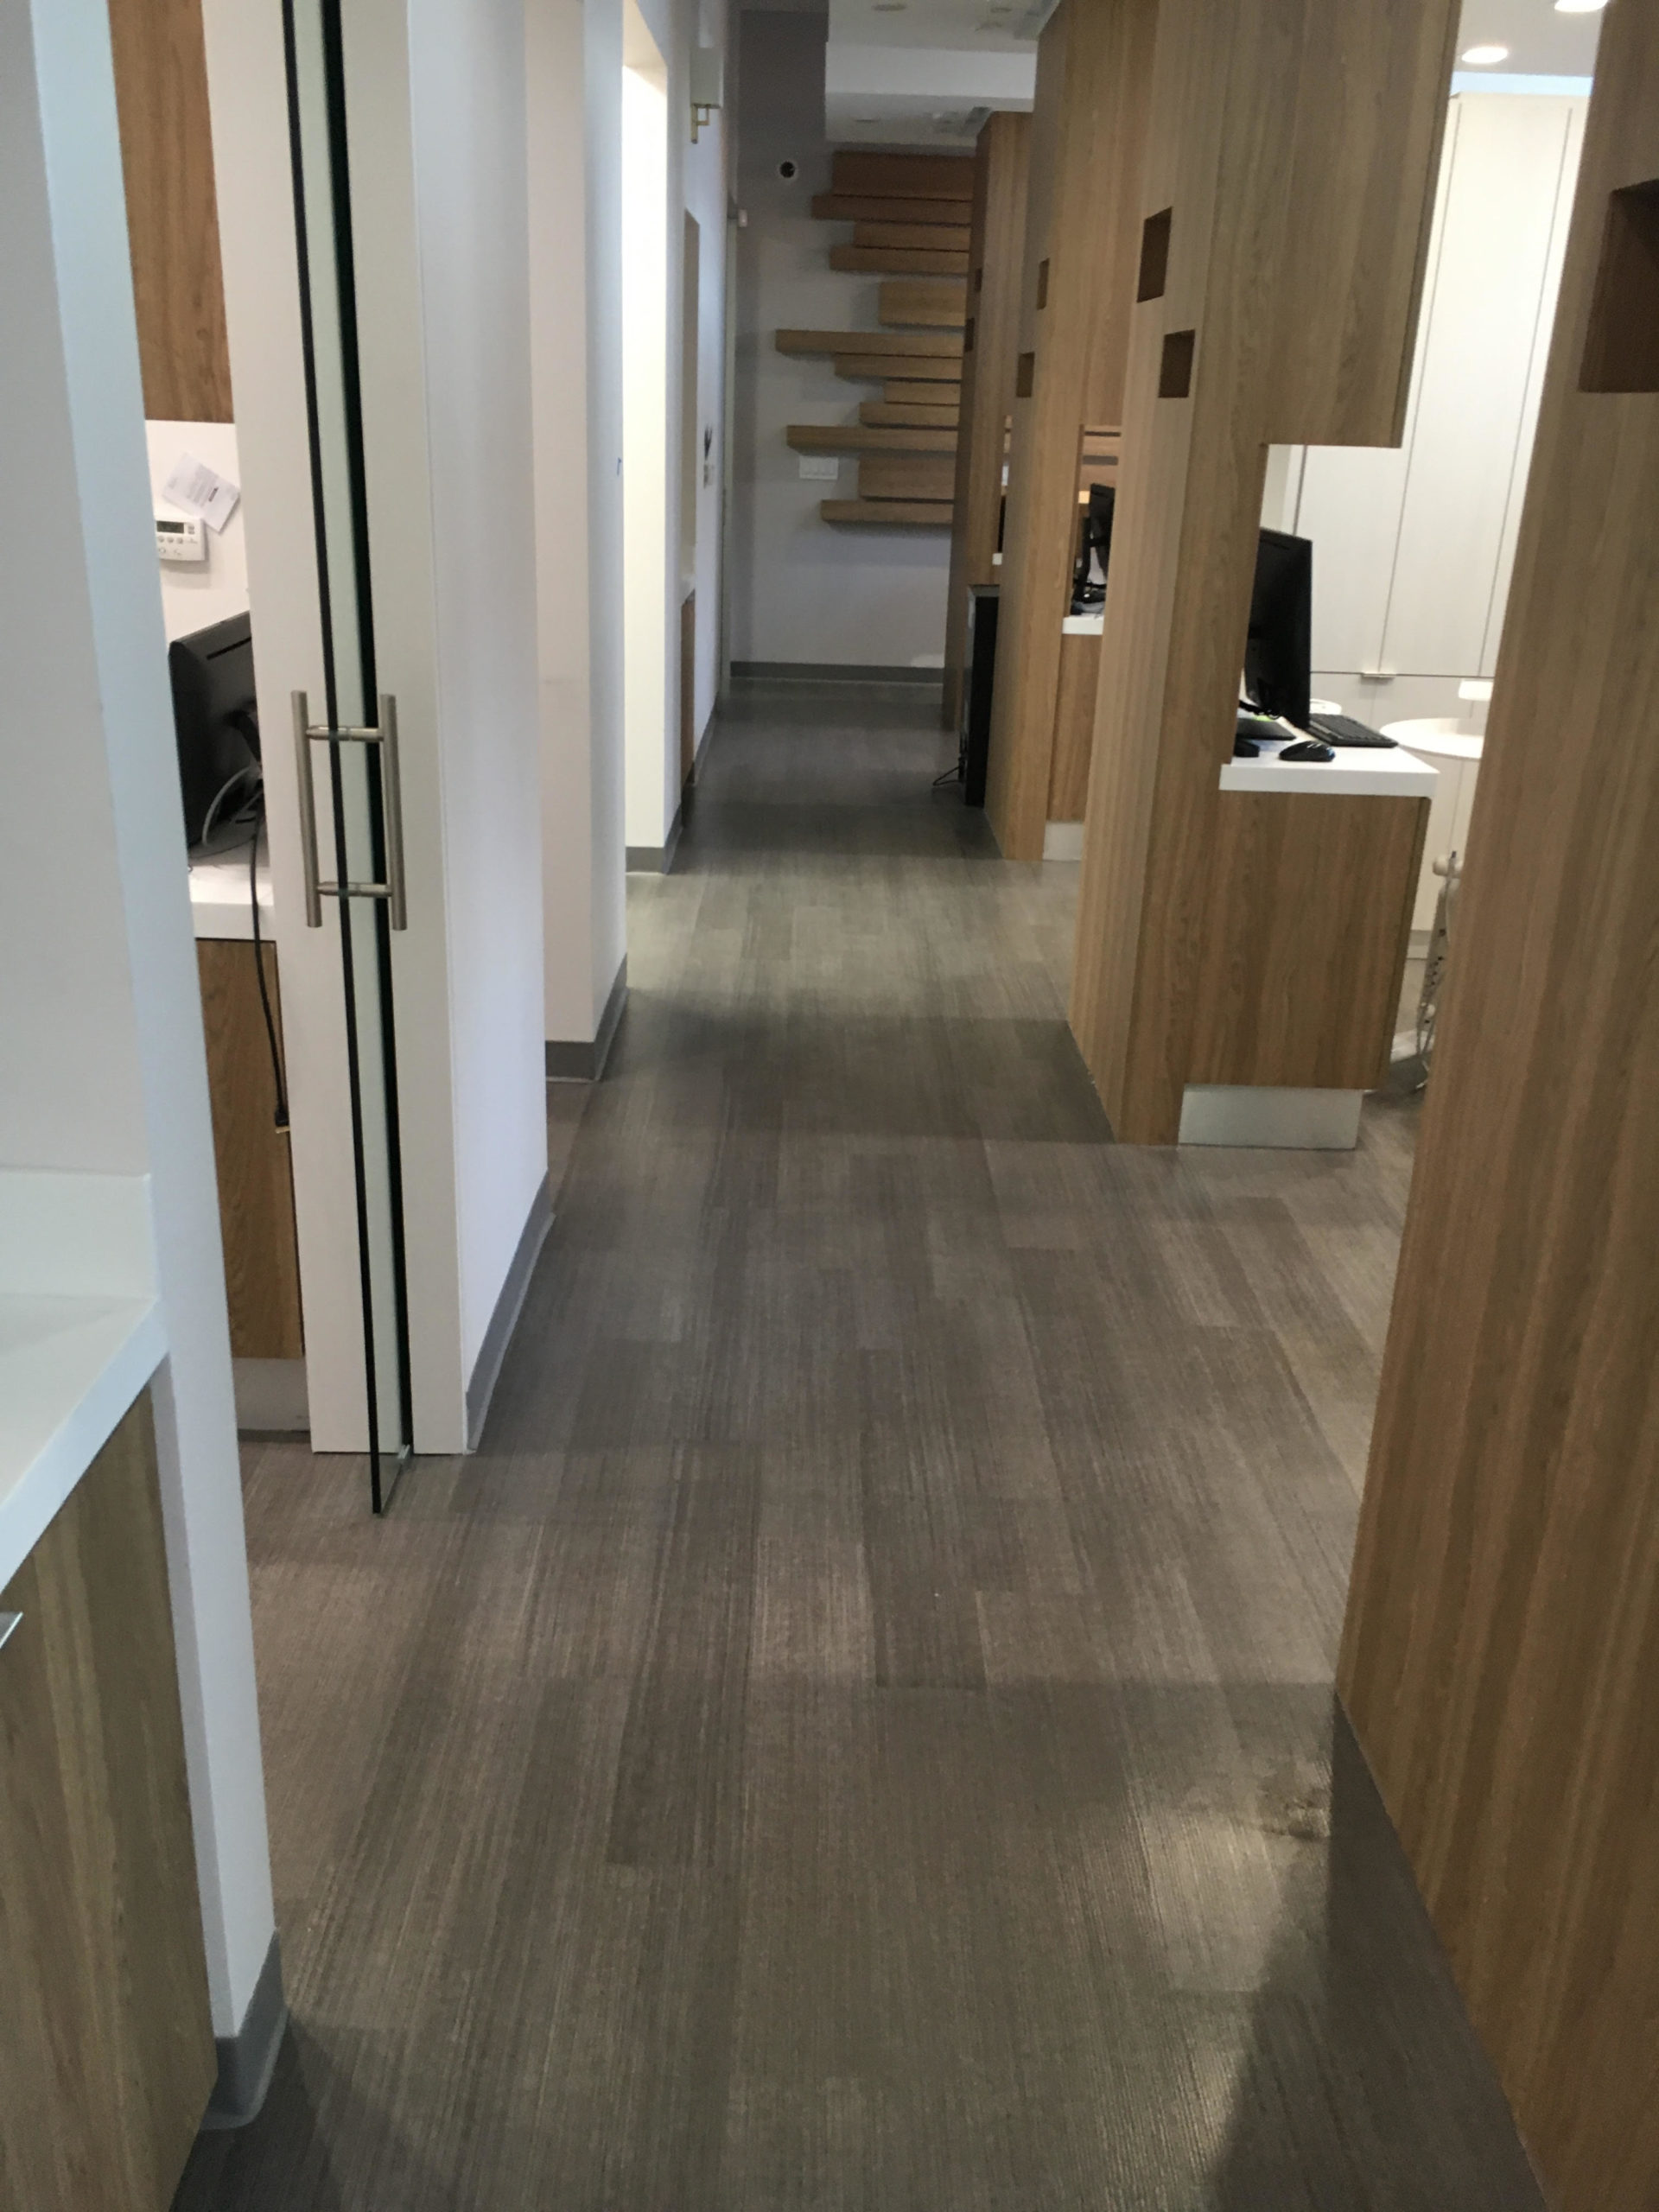 Dental Office in San Francisco with a new luxury vinyl plank flooring installed on concrete subfloor.